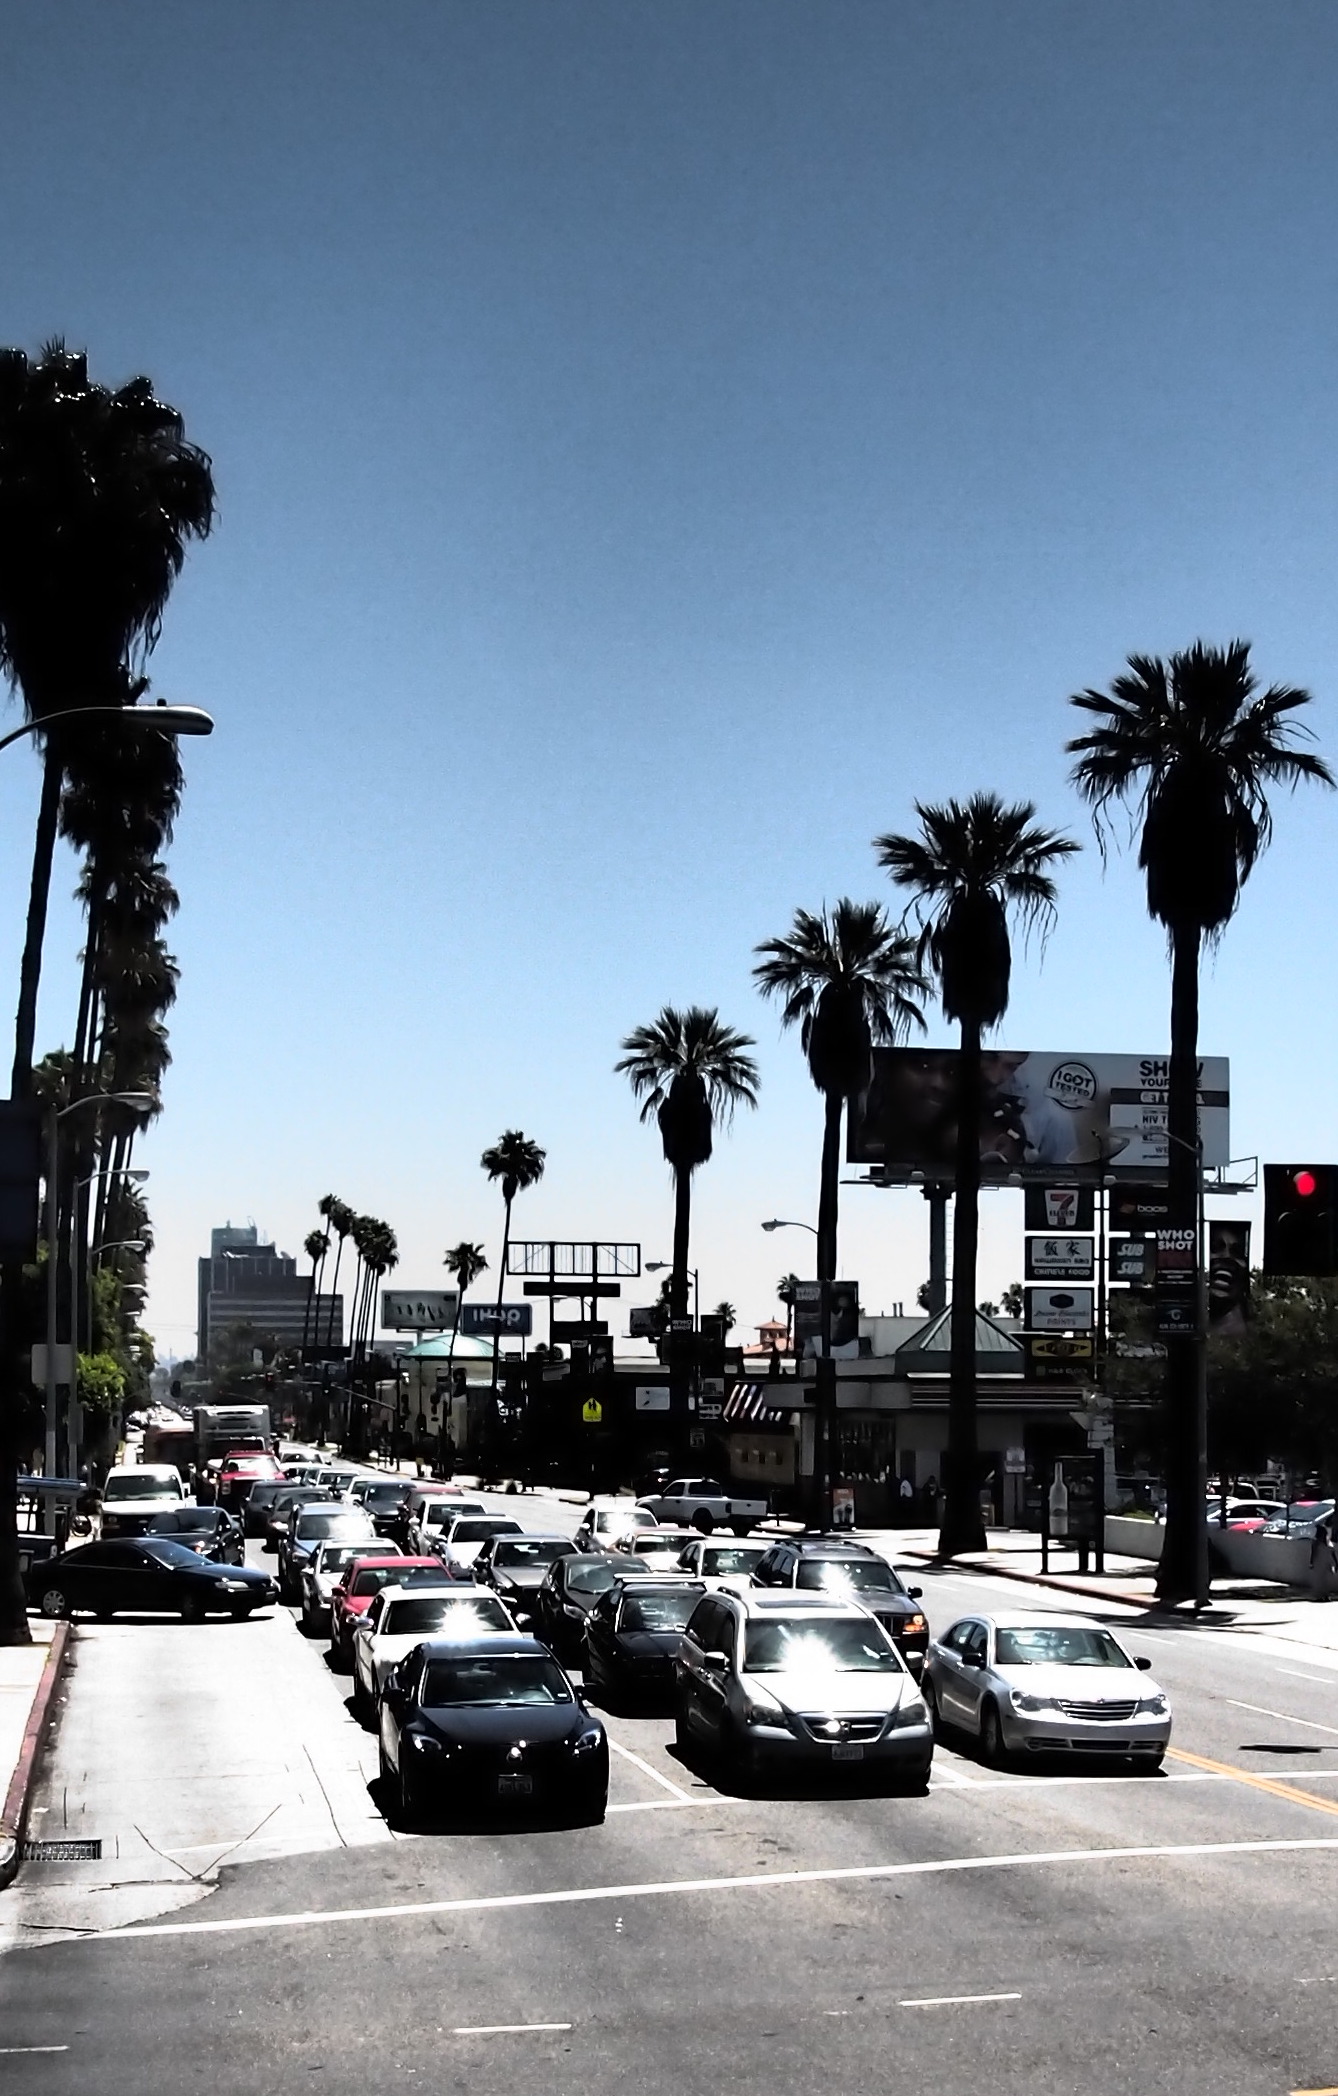 LOS ANGELES Streetscapes in the Summer!'T SWEAT THE STEWARDESS